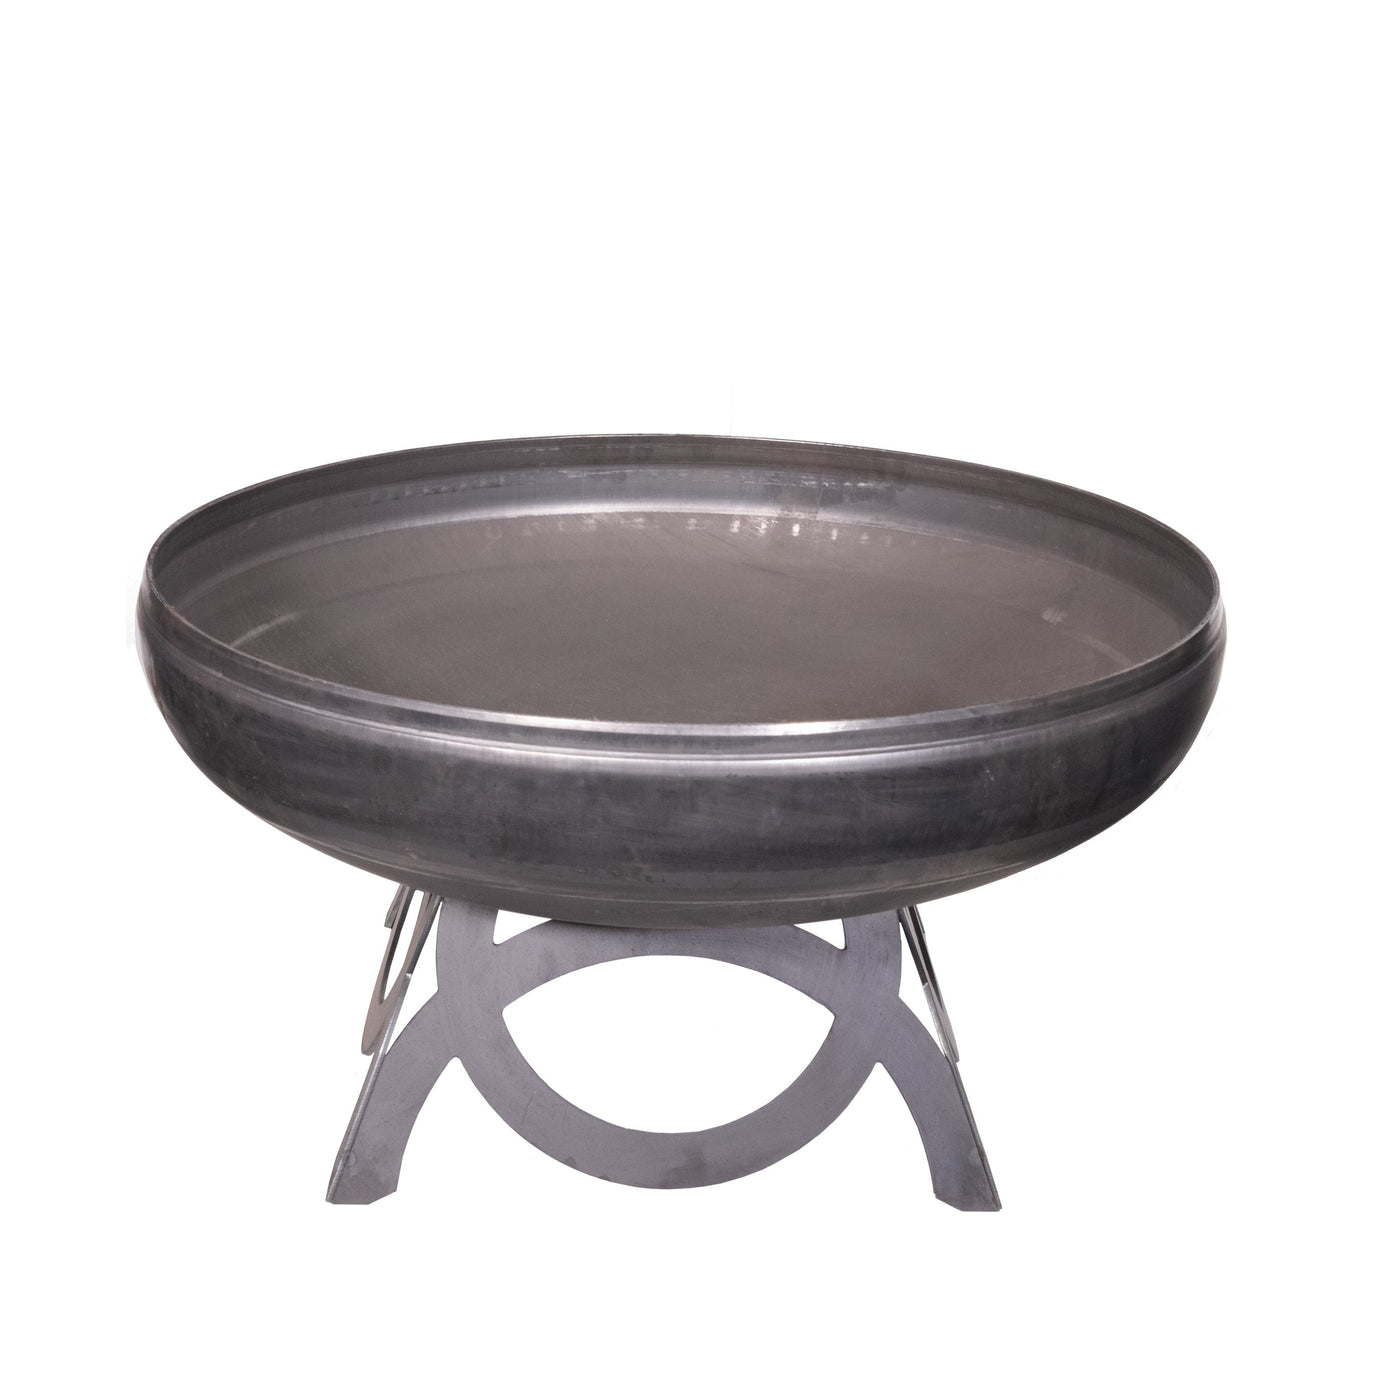 Ohio Flame Liberty Fire Pit - Curved Base